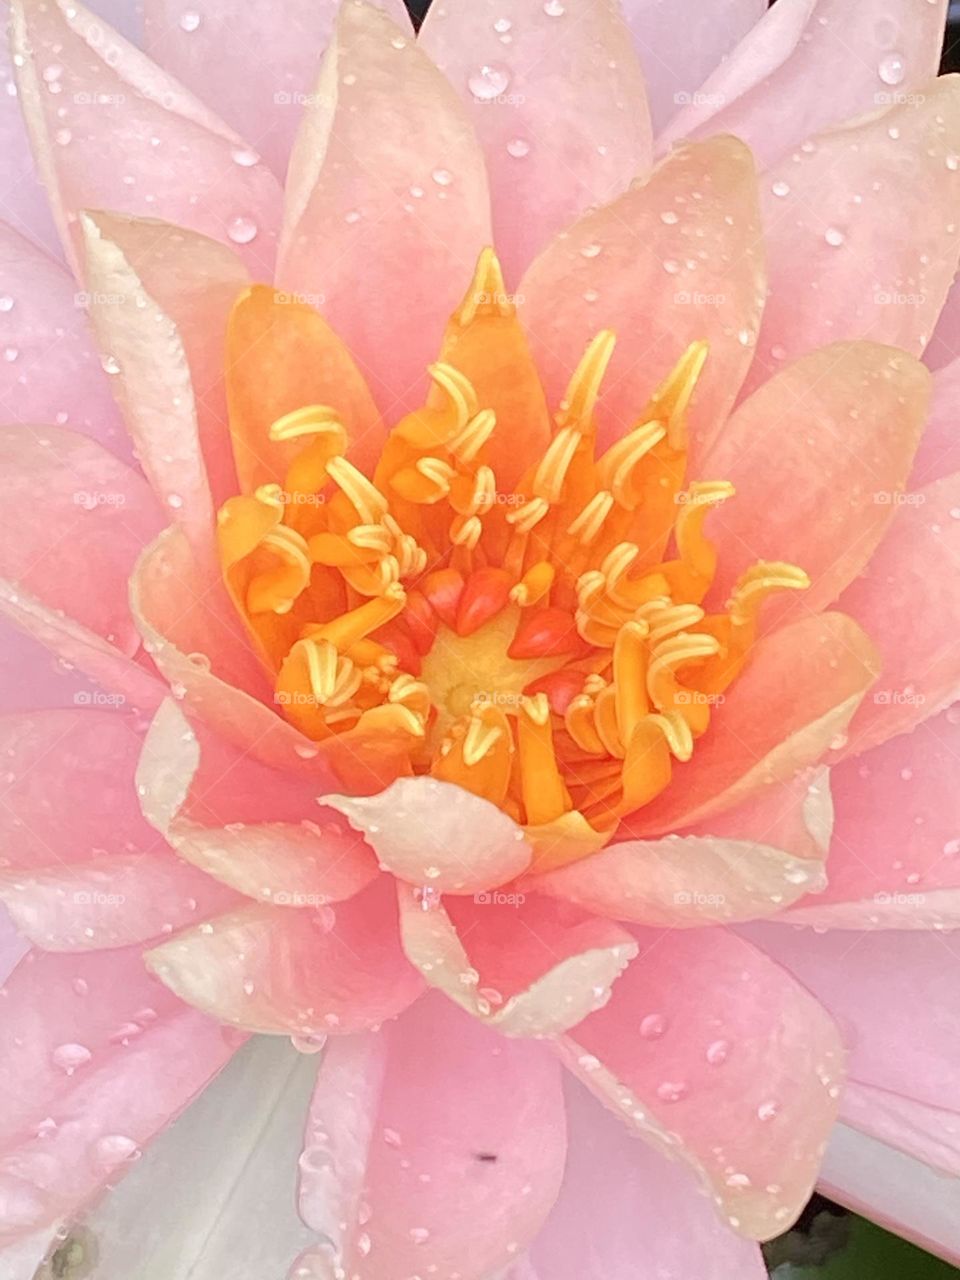 A beautiful water lily from my pond! Gorgeous pinks and yellows! 